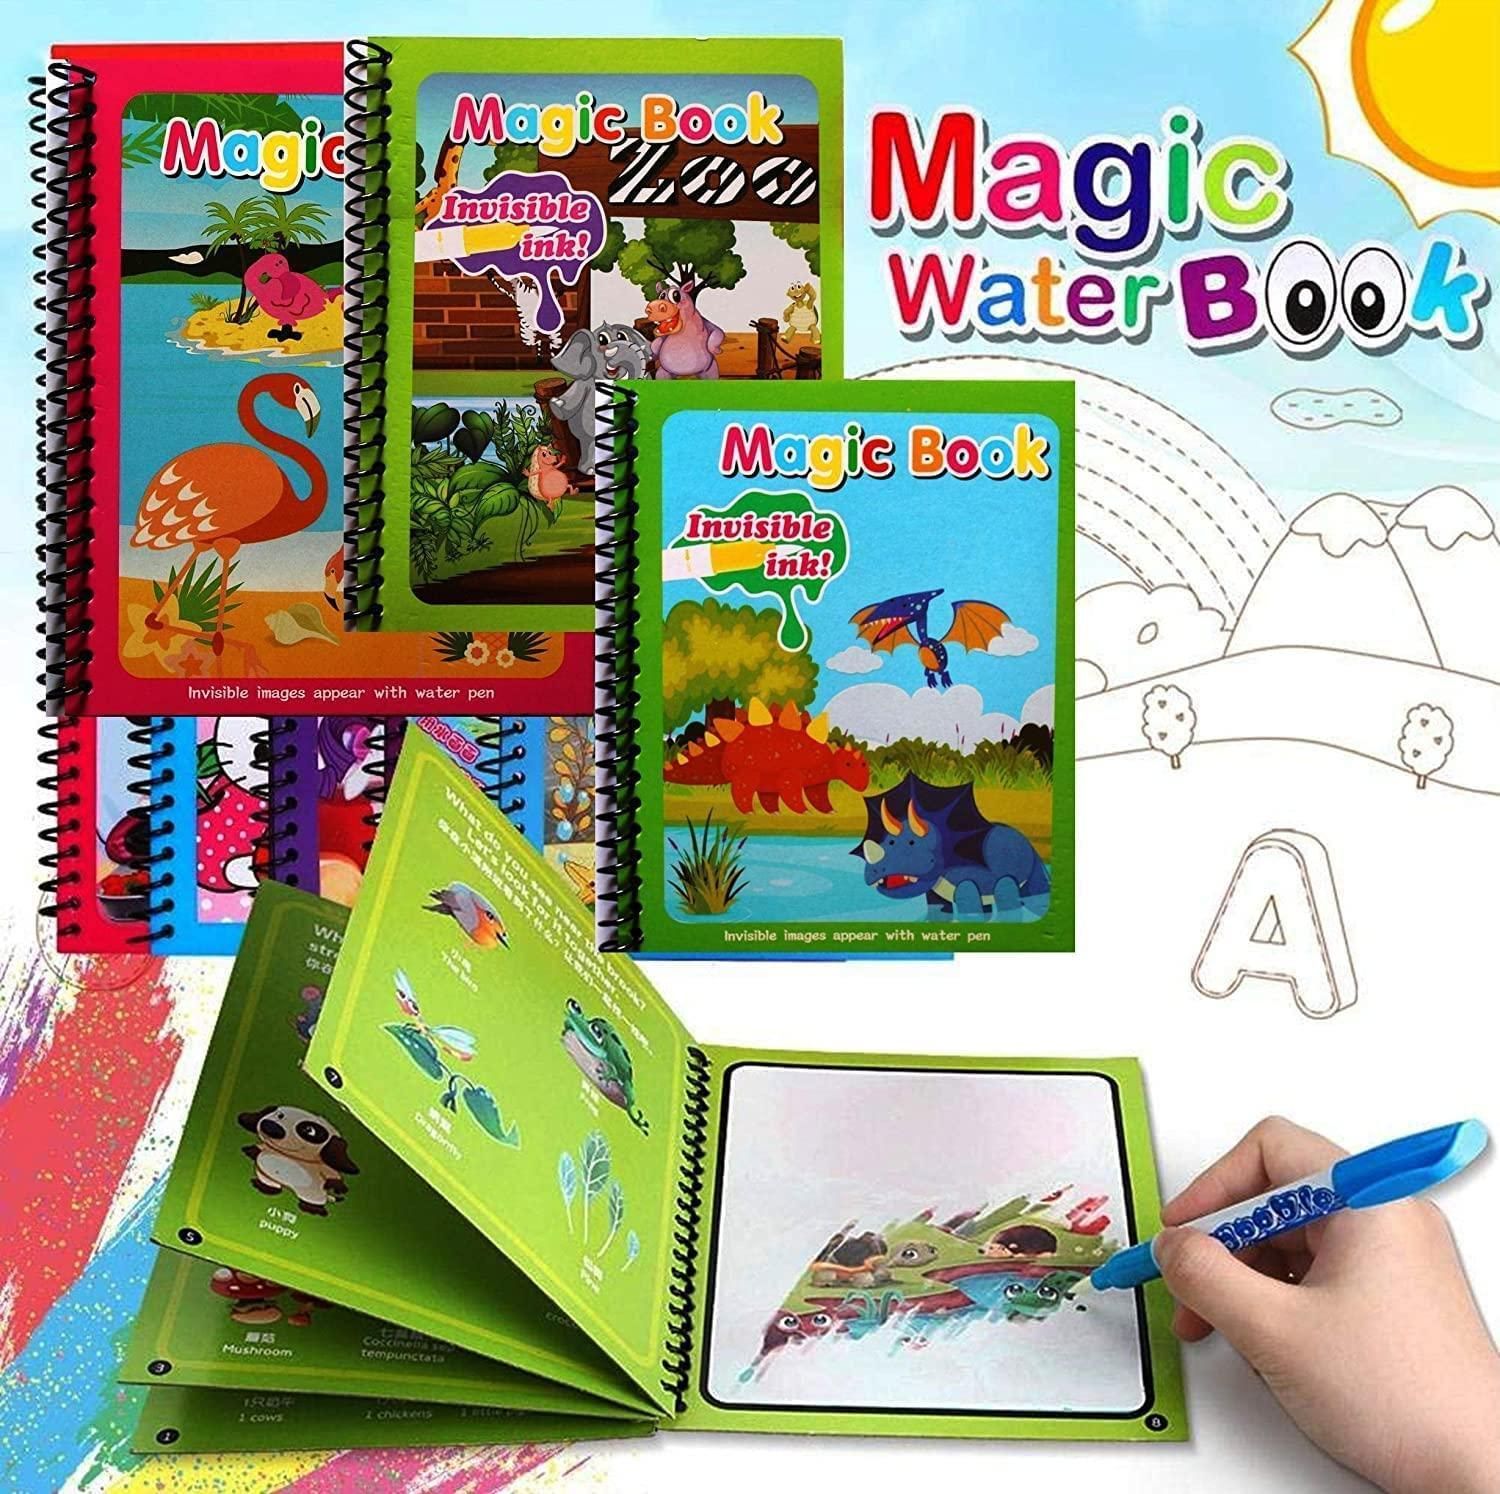 🦄MAGICAL WATER PAINTING BOOK FOR YOUR CHILD🎨 (SET OF 4)